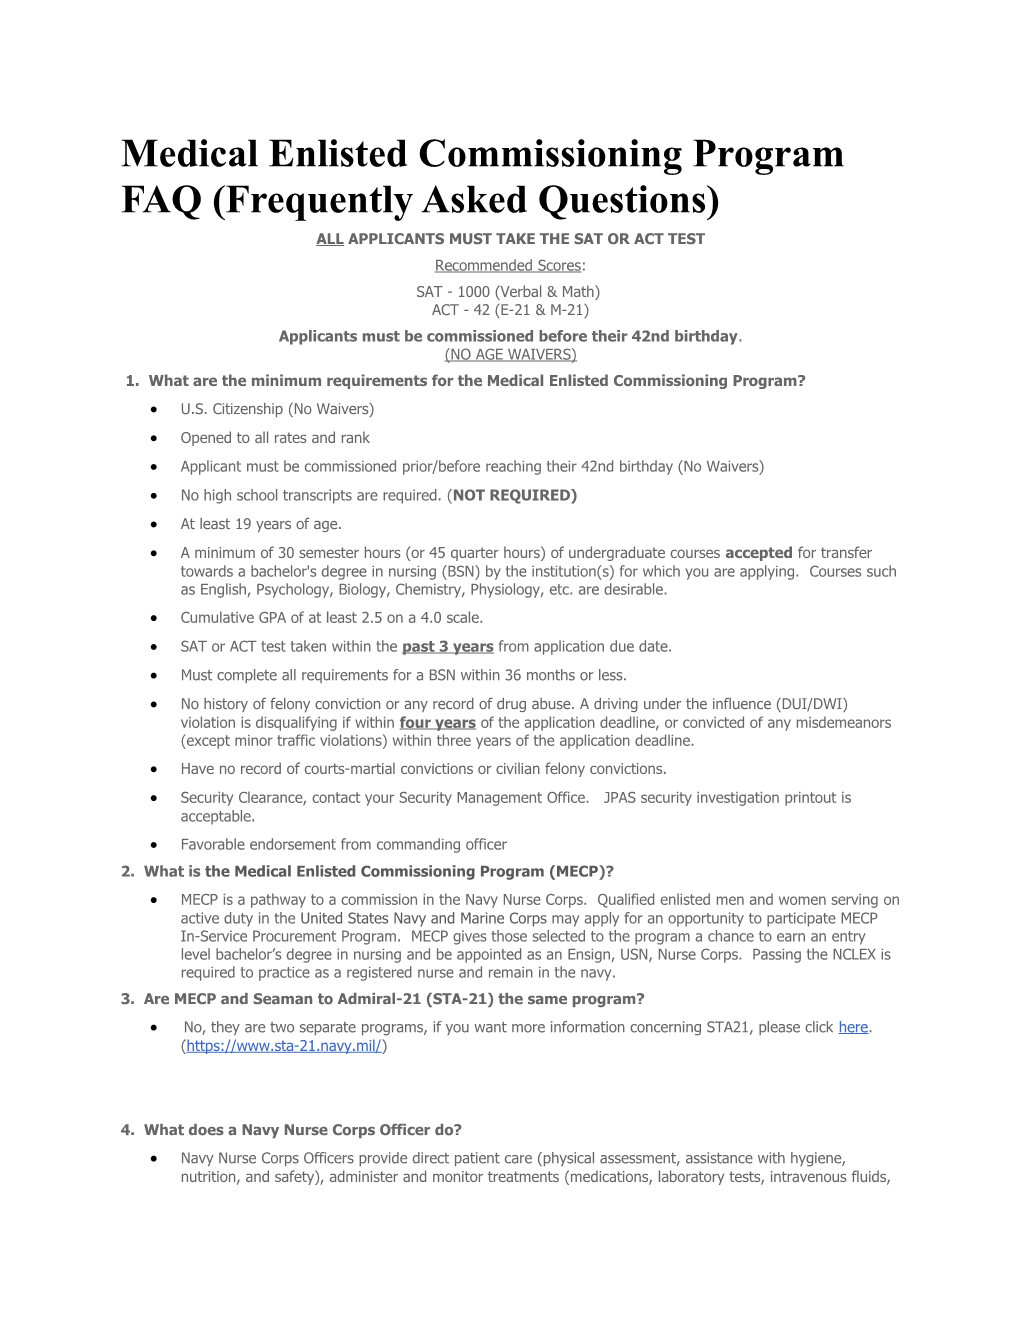 Medical Enlisted Commissioning Program FAQ (Frequently Asked Questions)